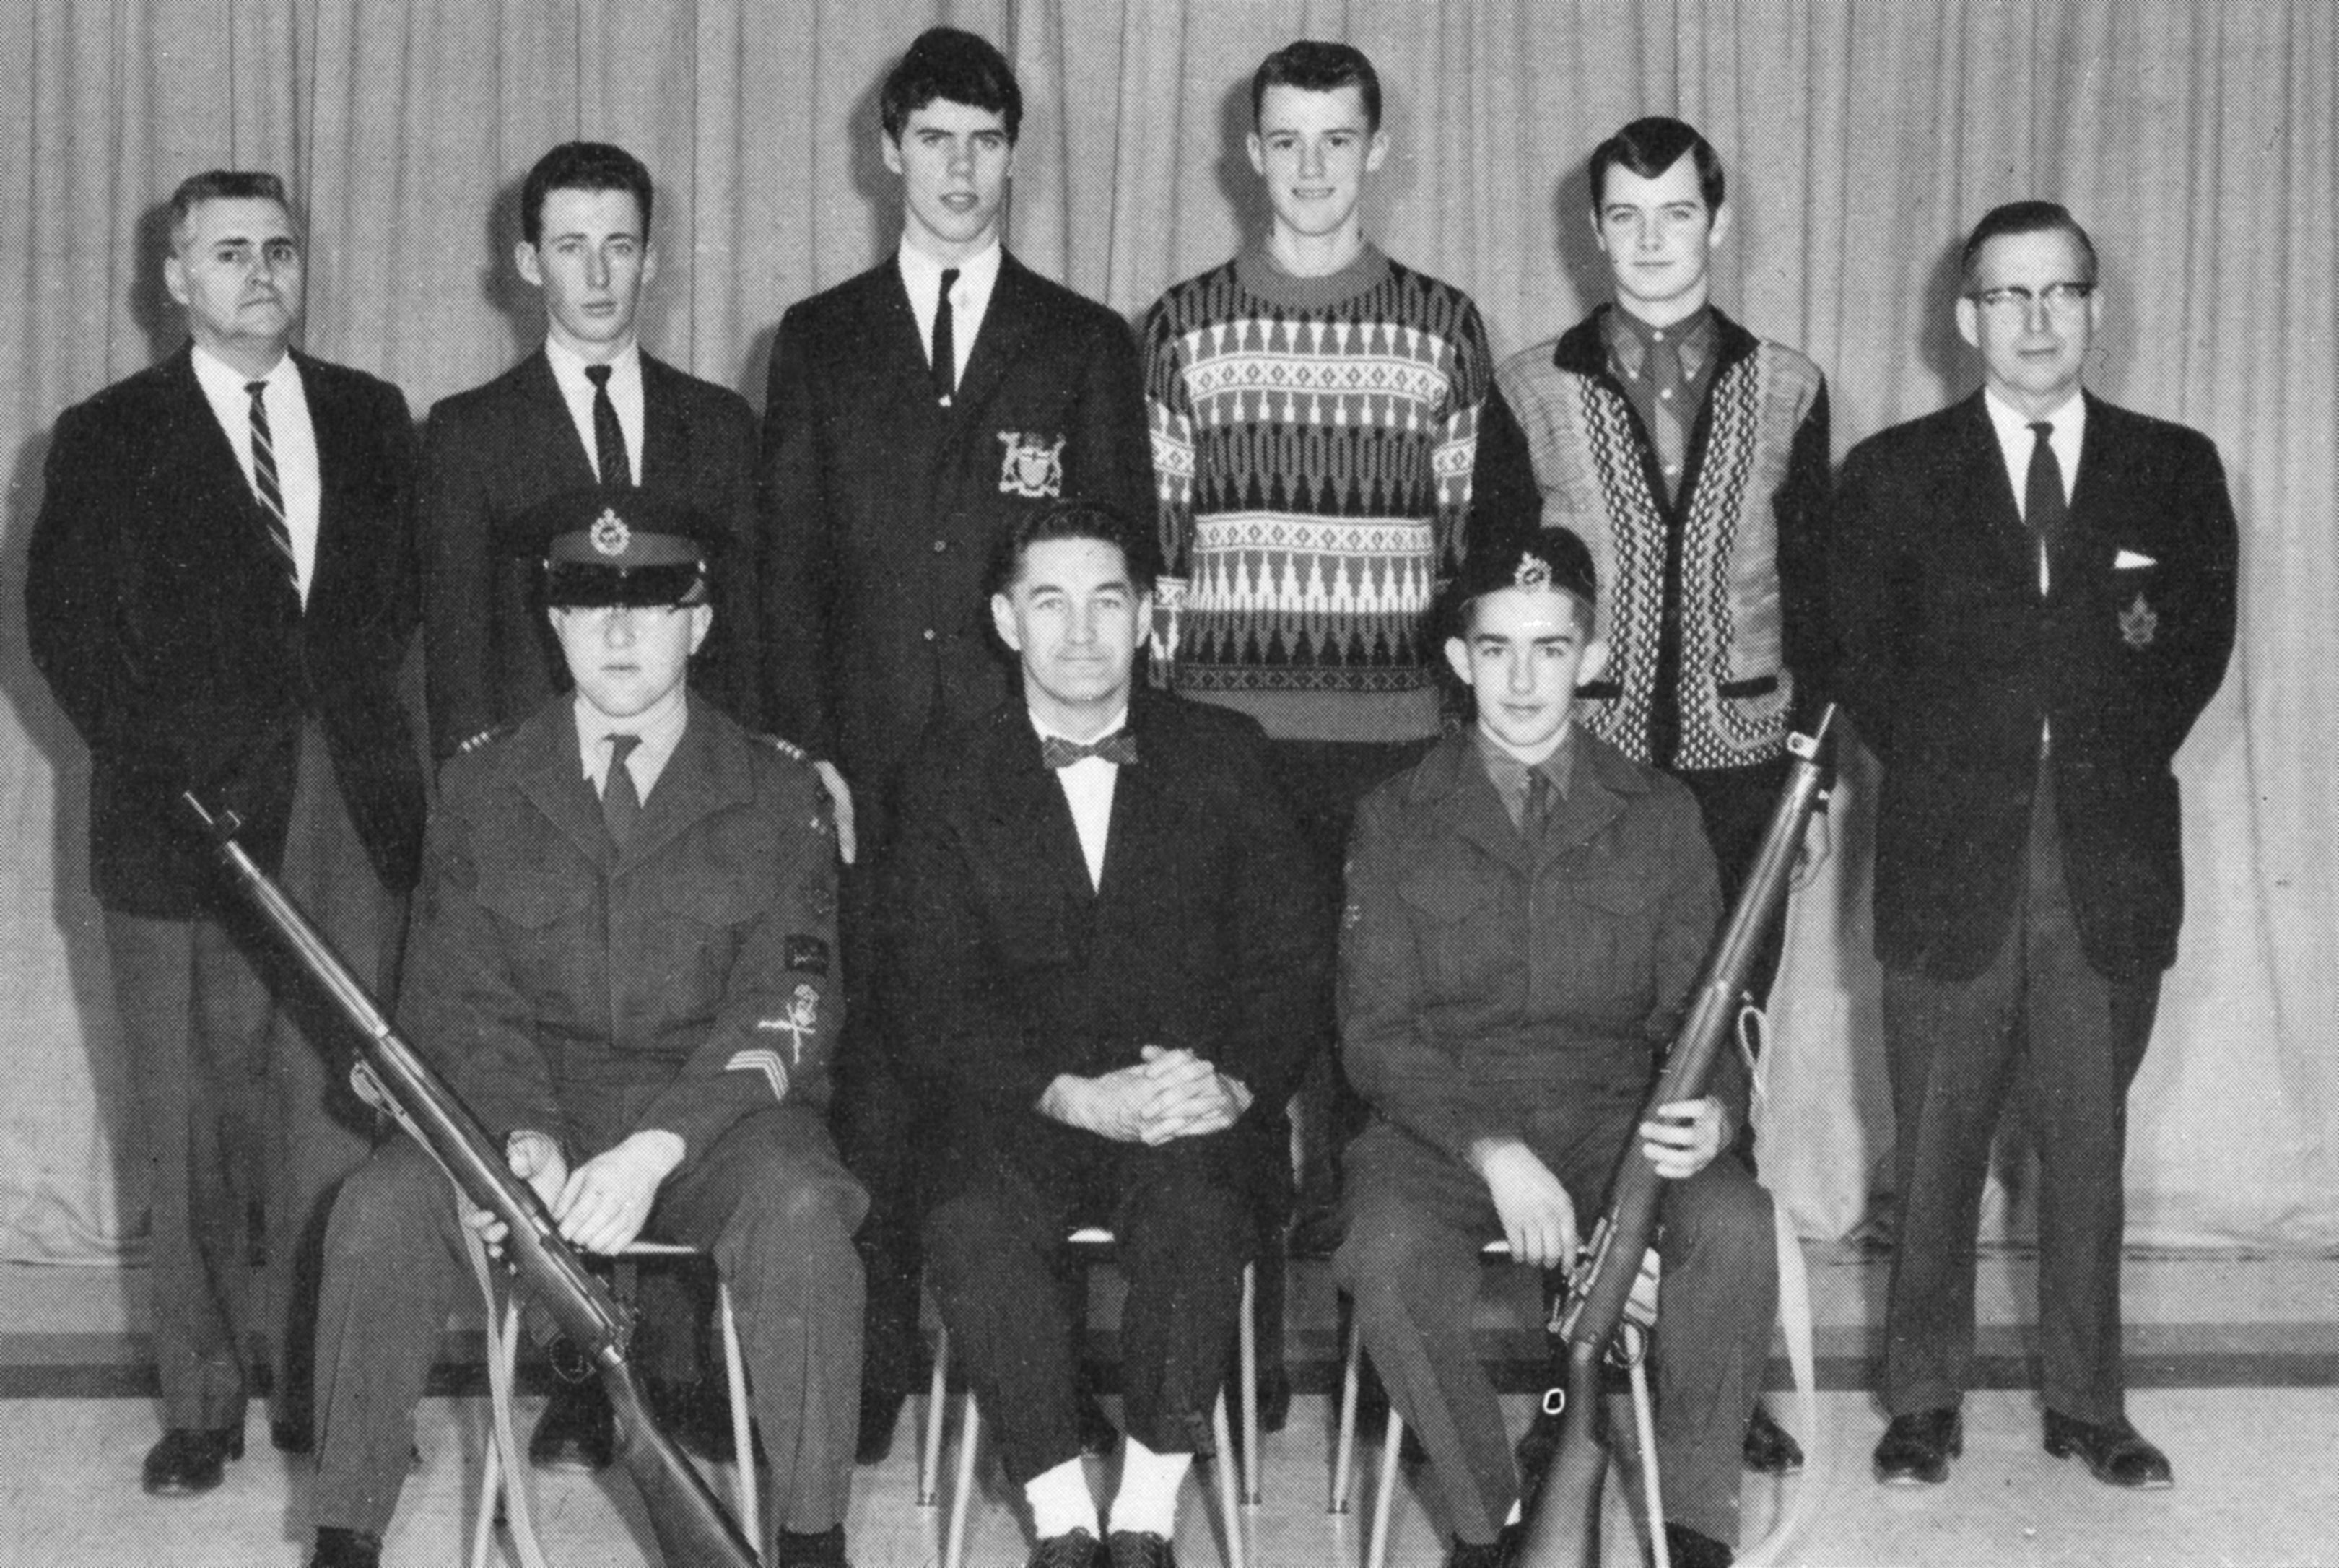 (Click to magnify) FRONT ROW: M. Ross, Mr. Brunne, D. Moore; ***BACK ROW: Mr. A. McConney, Keith St.John, Larry Manley, G. Hockley, R. Wakeford, Mr. T. Smith.